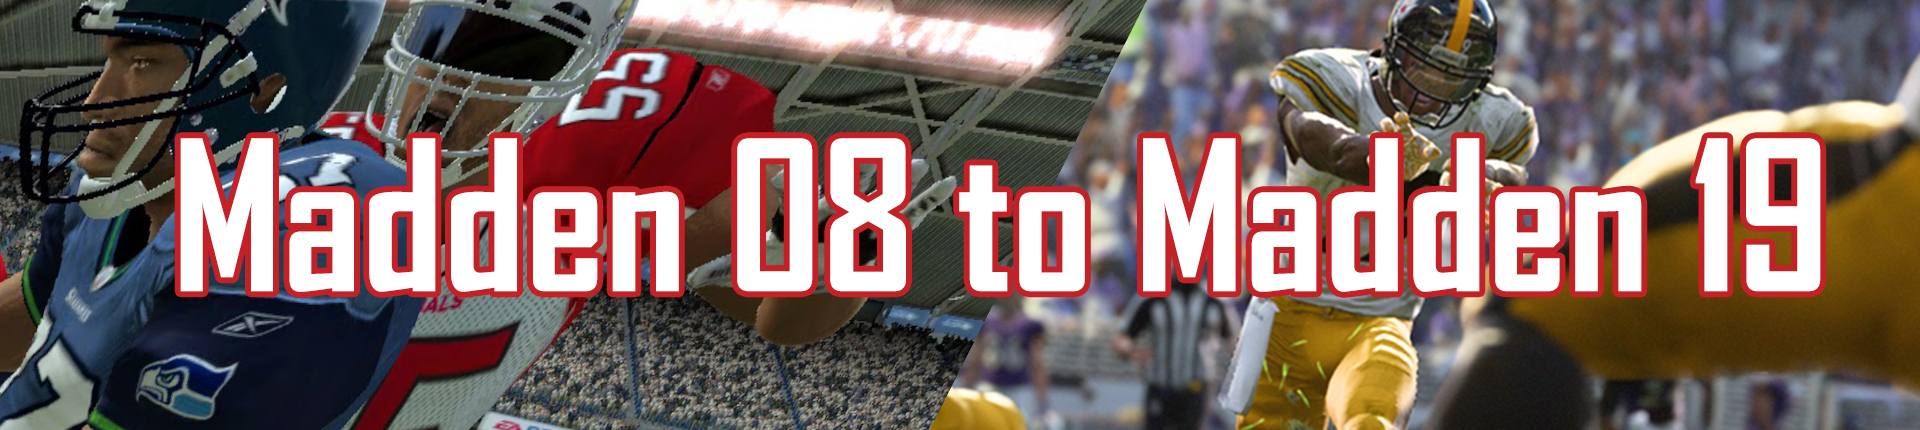 Madden 08 to Madden NFL 19 [PC] – Updated!